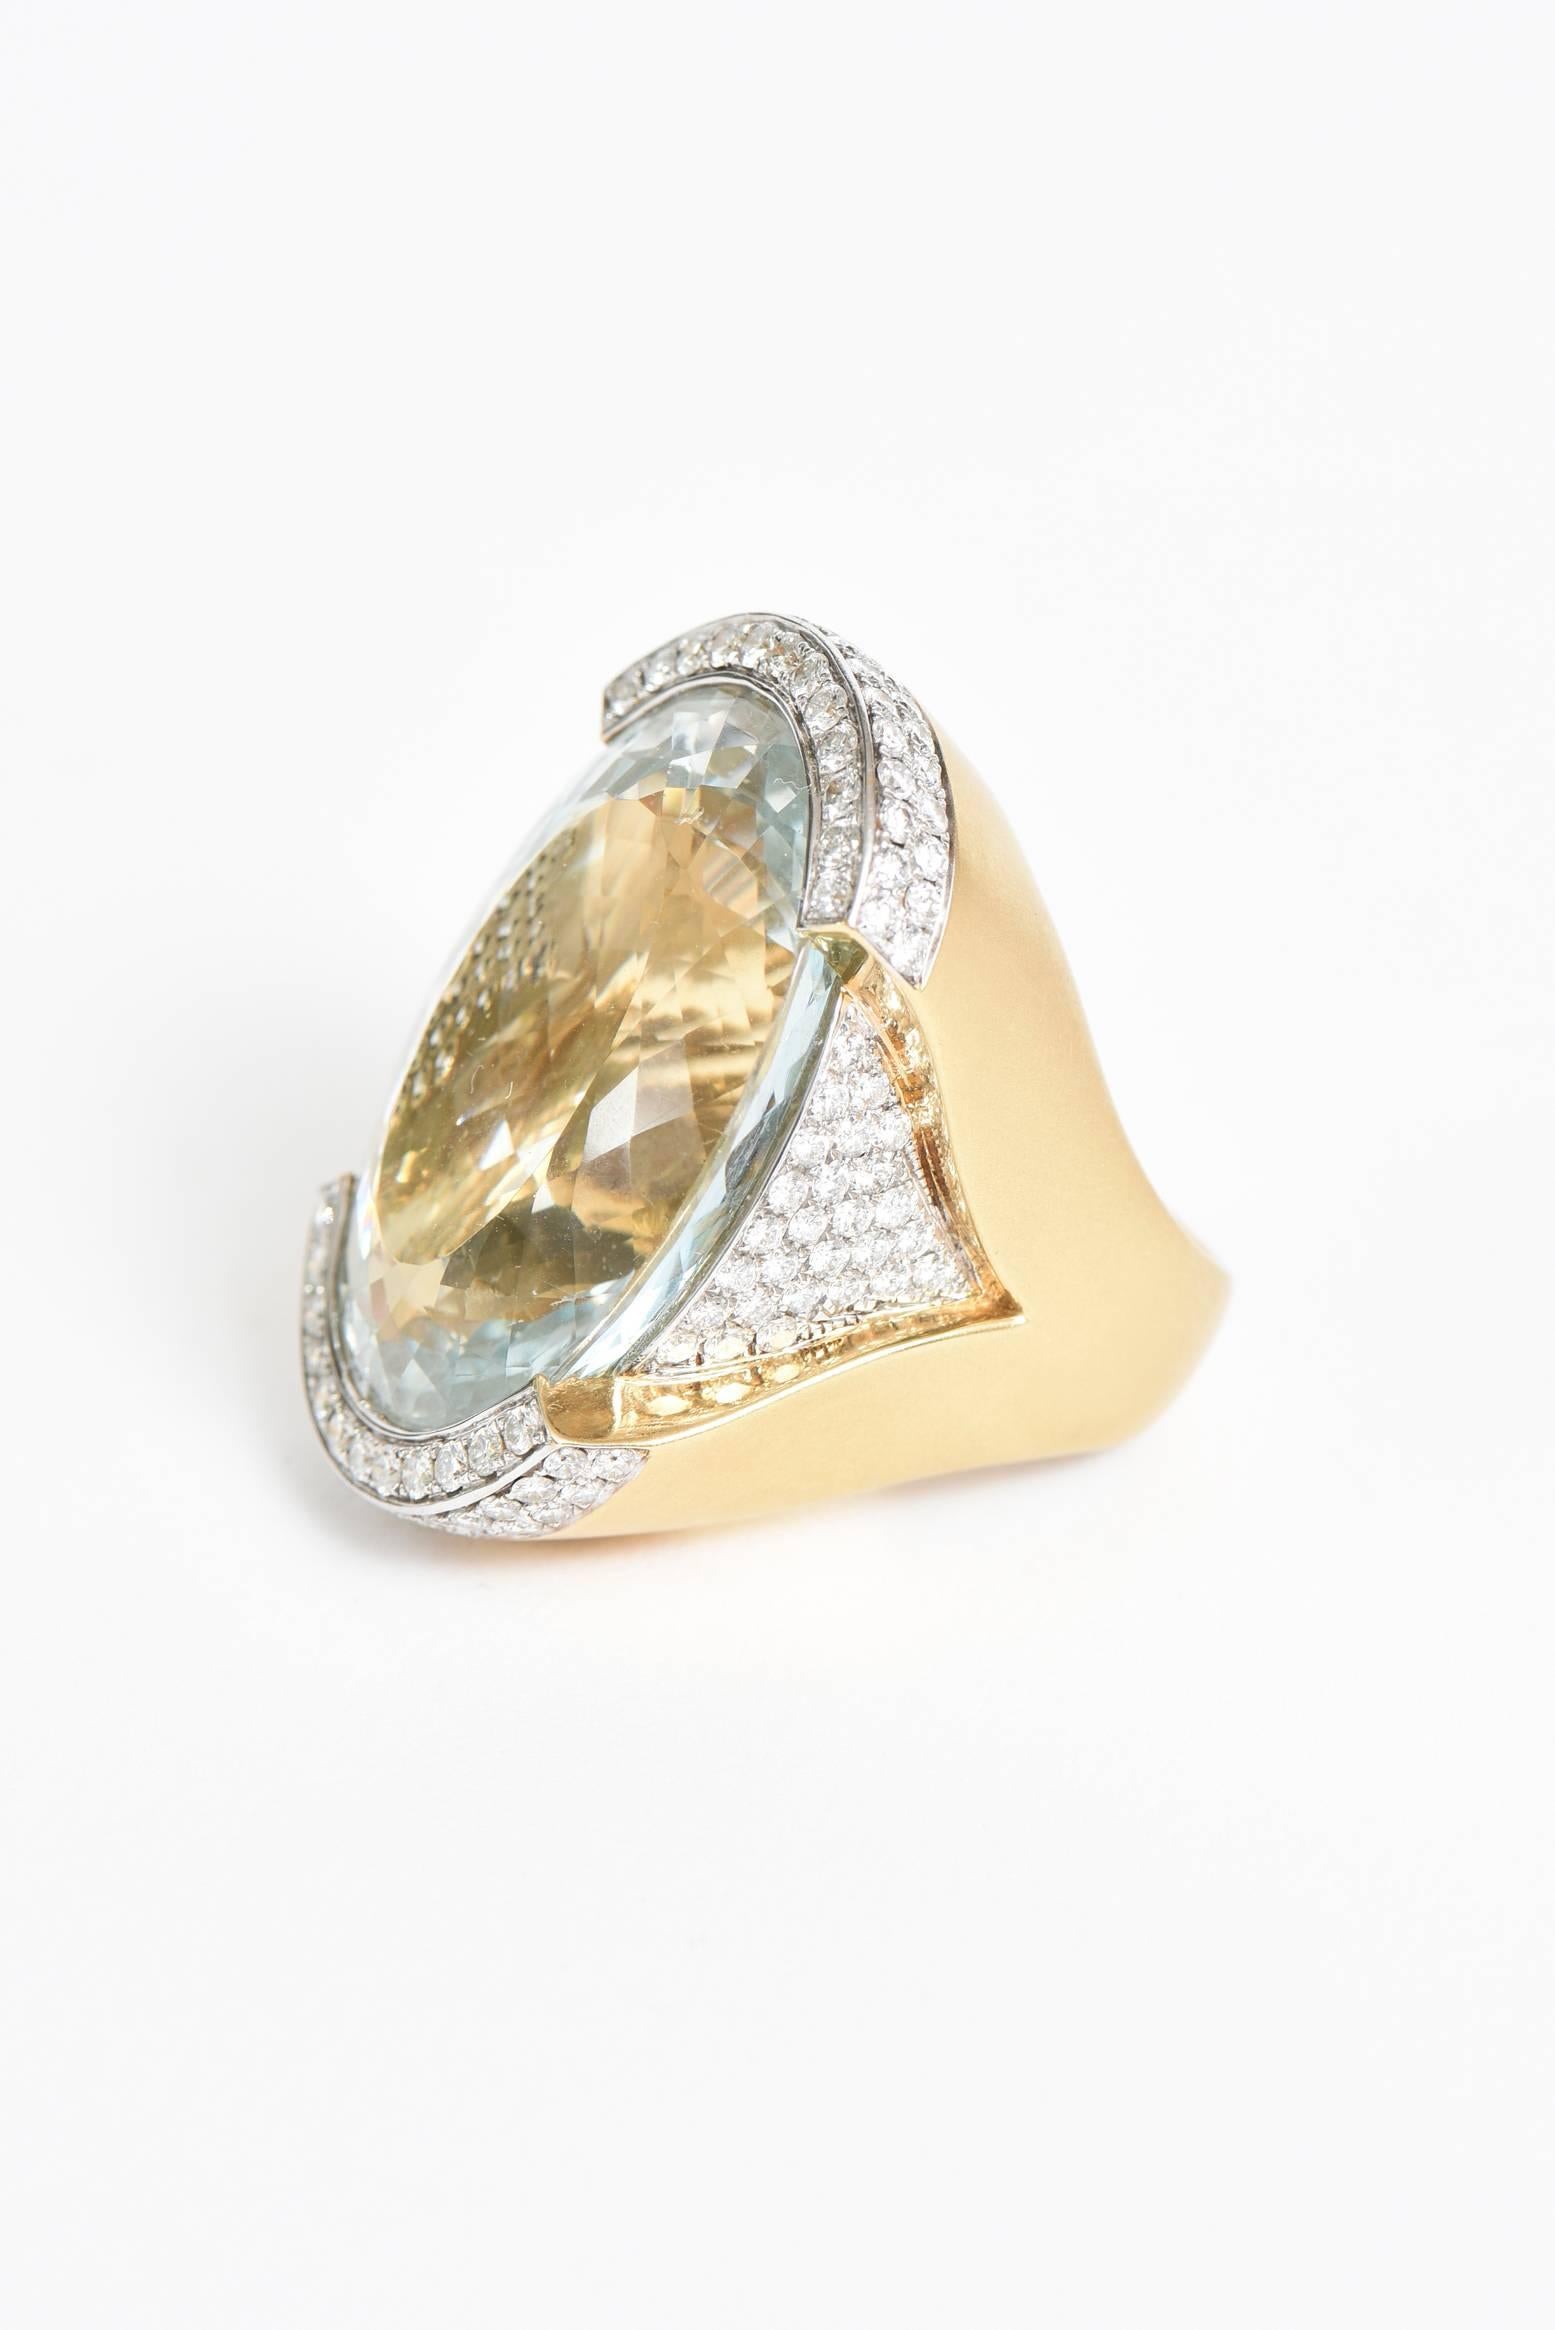 Custom Large Aquamarine and Diamond & 18 Karat Gold Cocktail Ring / SALE In Good Condition For Sale In North Miami, FL